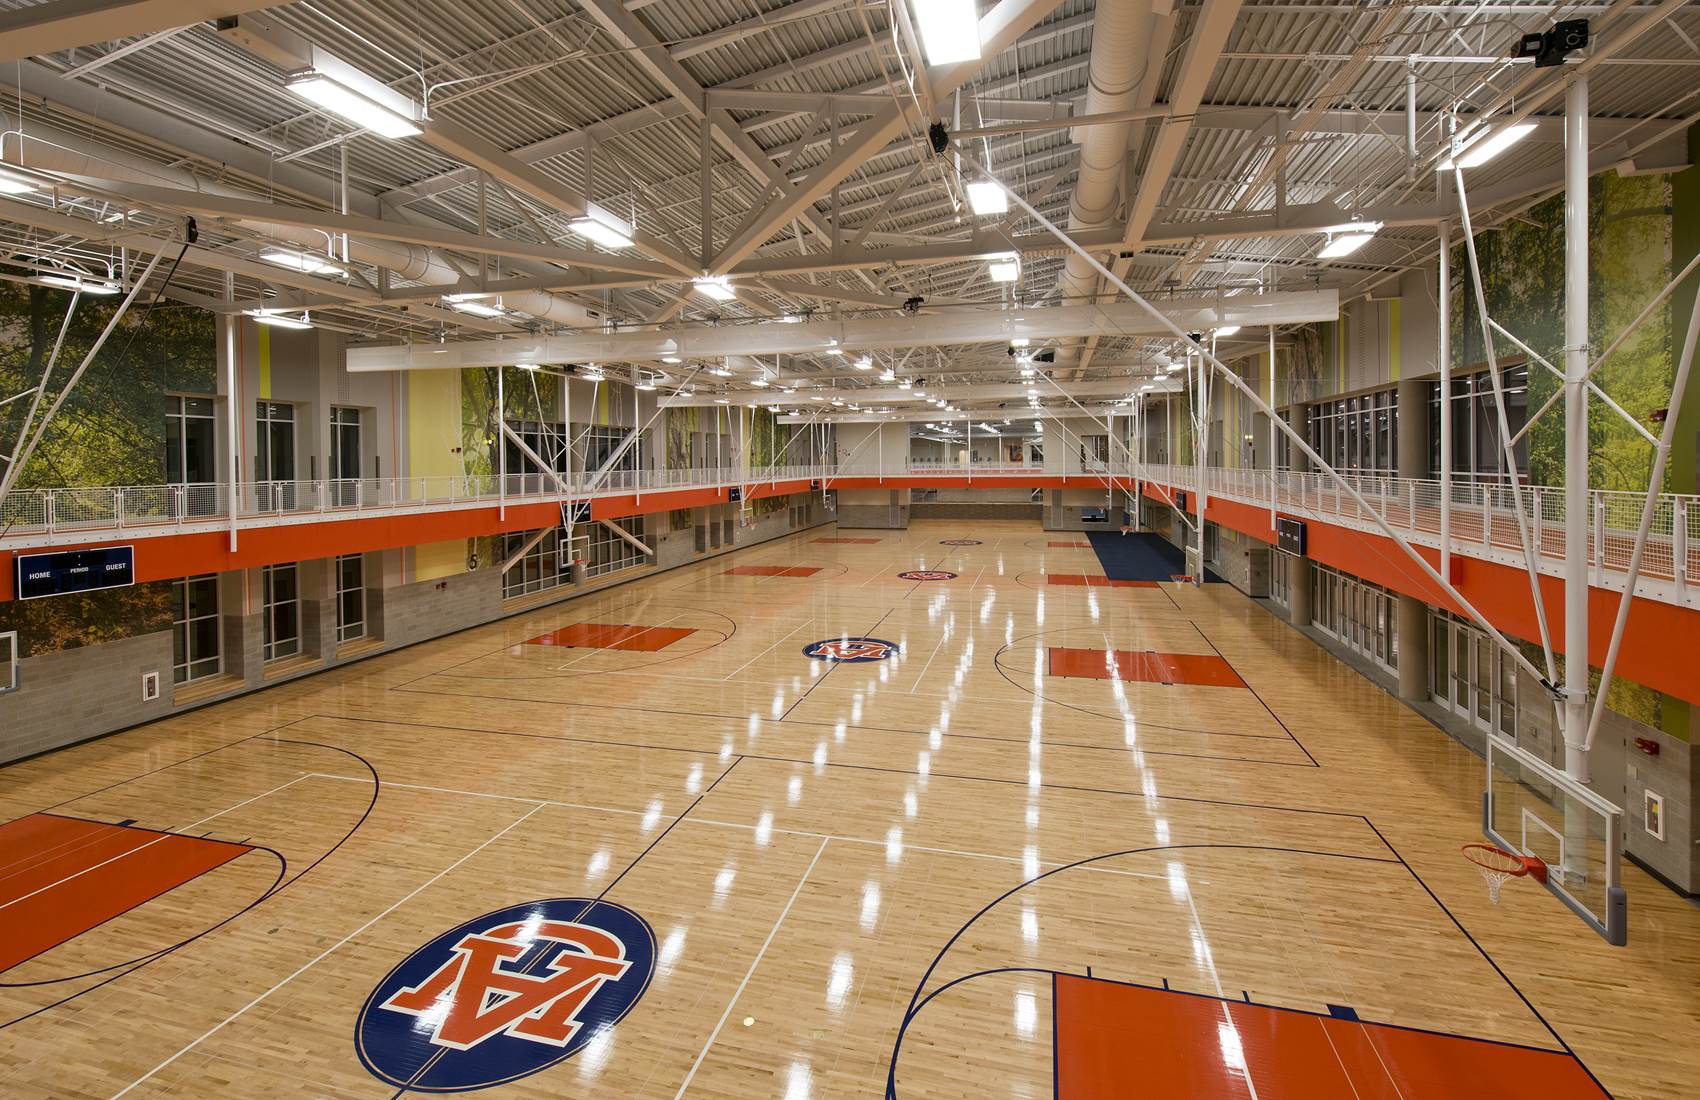 Basketball courts and indoor track at the Auburn University Recreation and Wellness Center